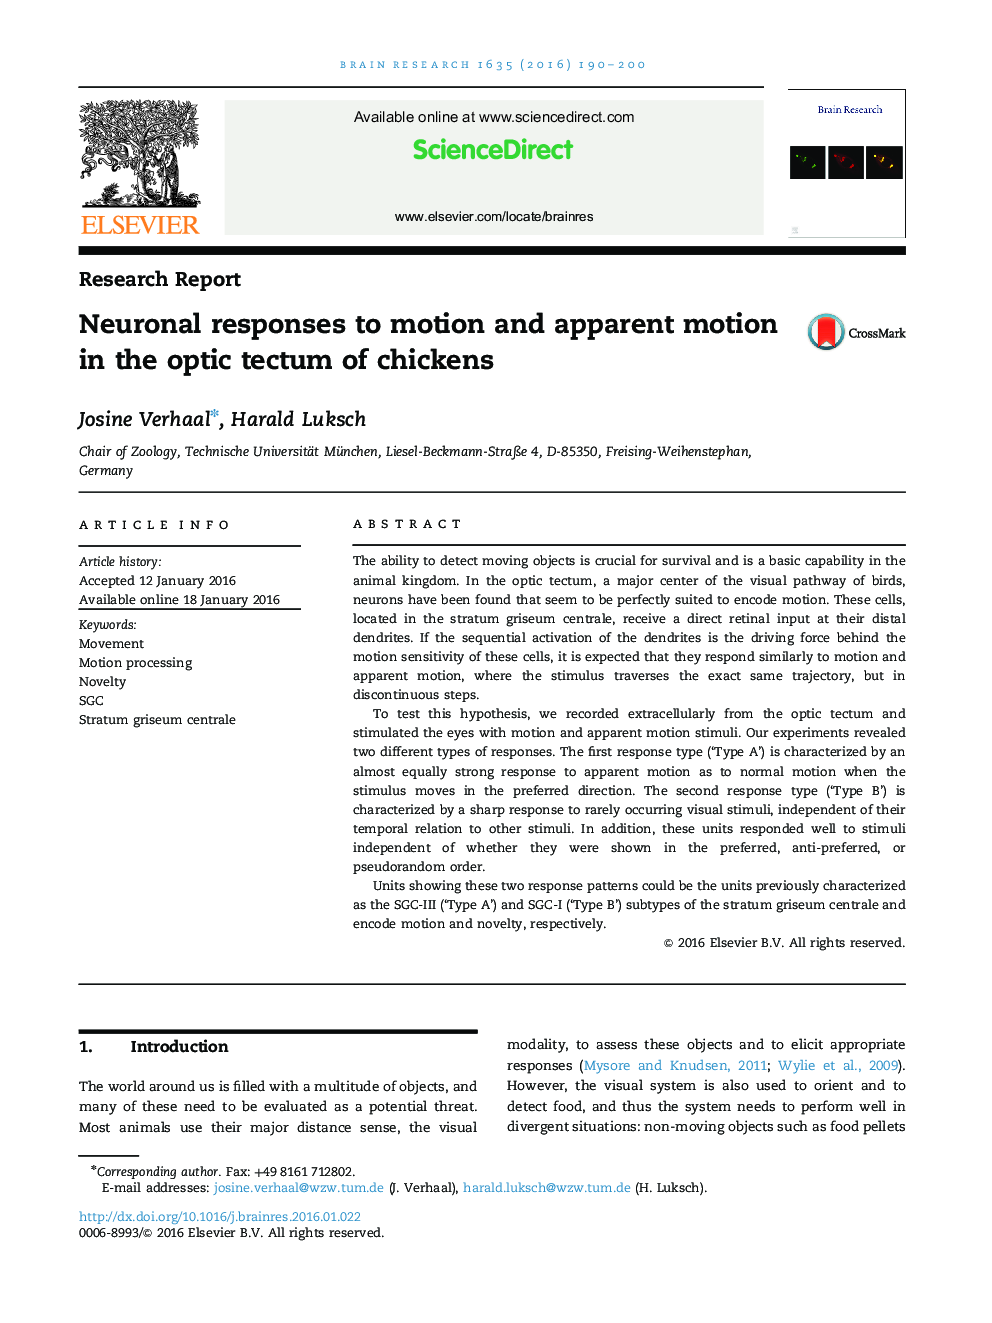 Research ReportNeuronal responses to motion and apparent motion in the optic tectum of chickens